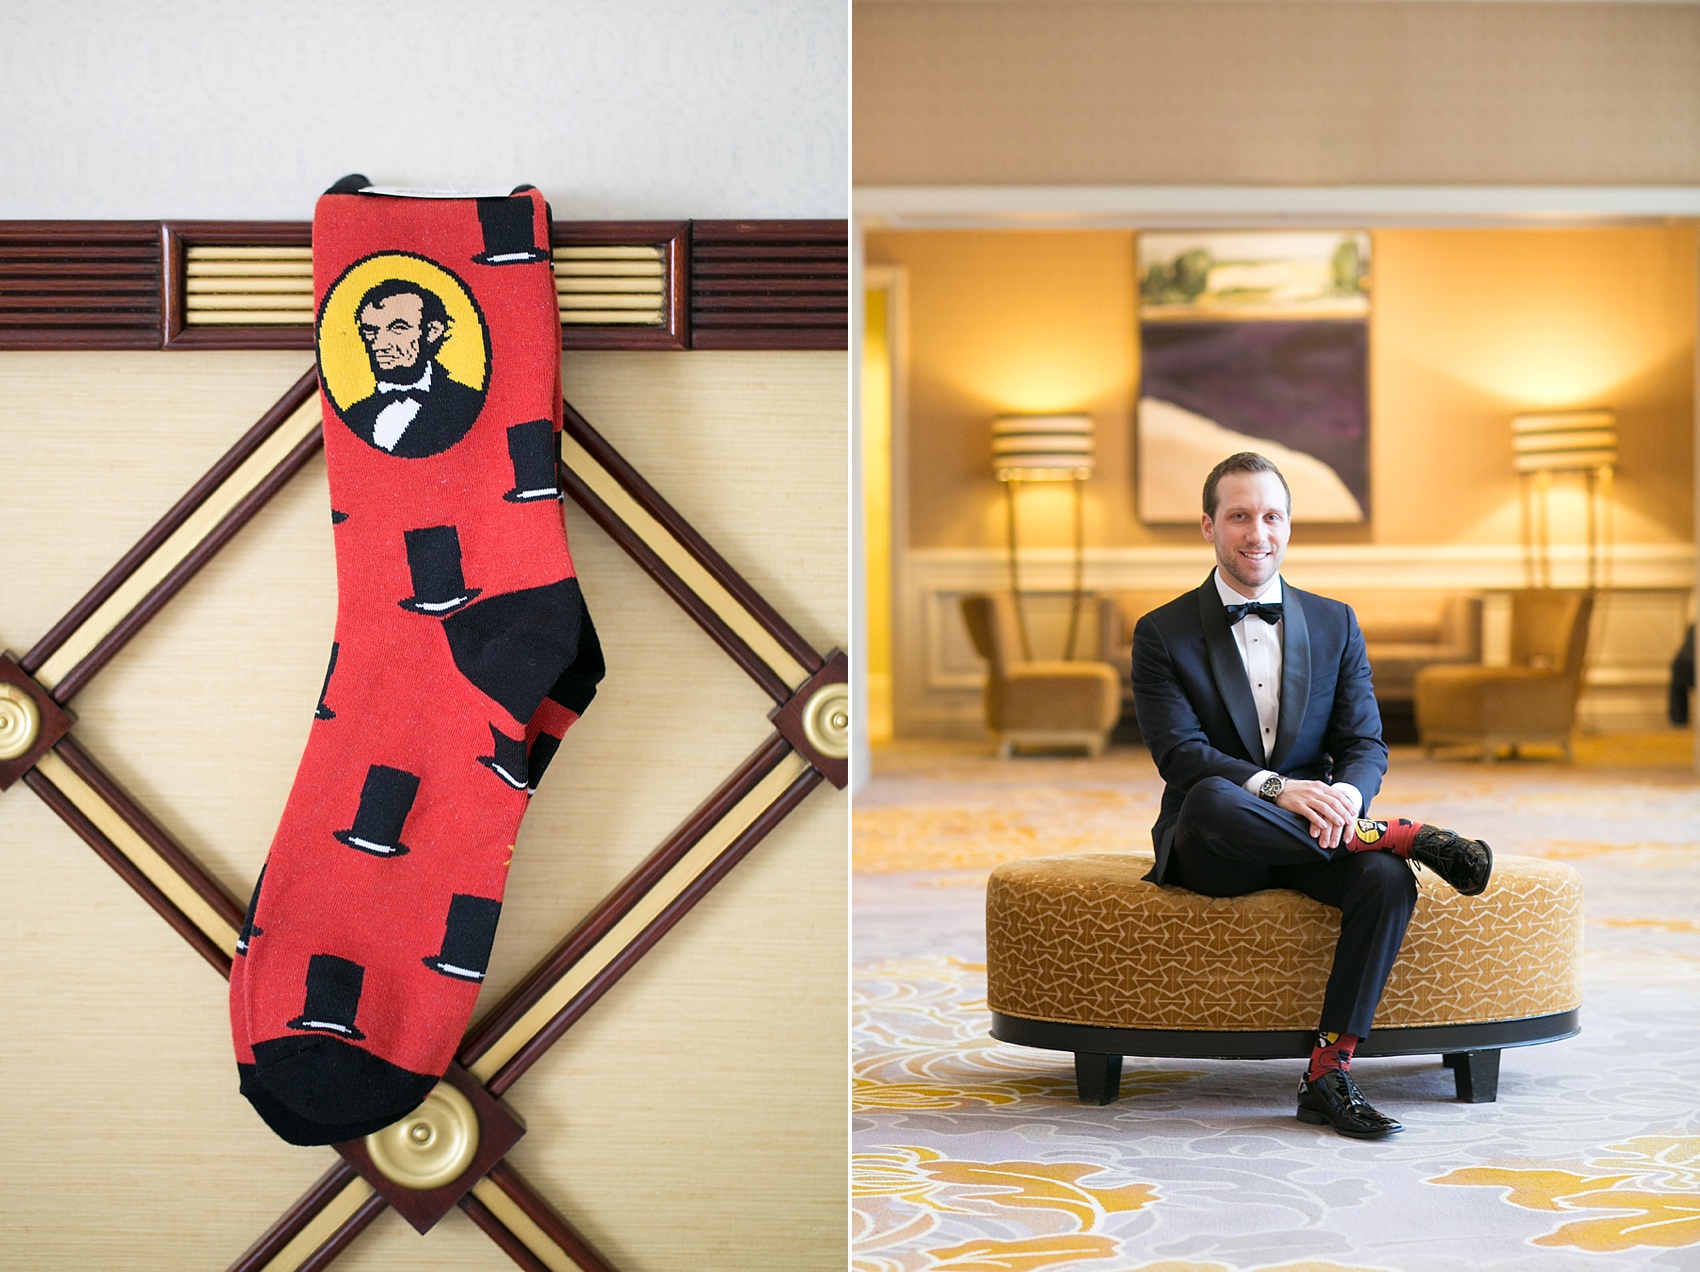 Washington, DC wedding photos by Mikkel Paige. The groom in a custom navy and black tuxedo for a Presidents Weekend wedding with Sock it To Me Abraham Lincoln, Honest Abe socks, at The Ritz Carlton, Pentagon City.